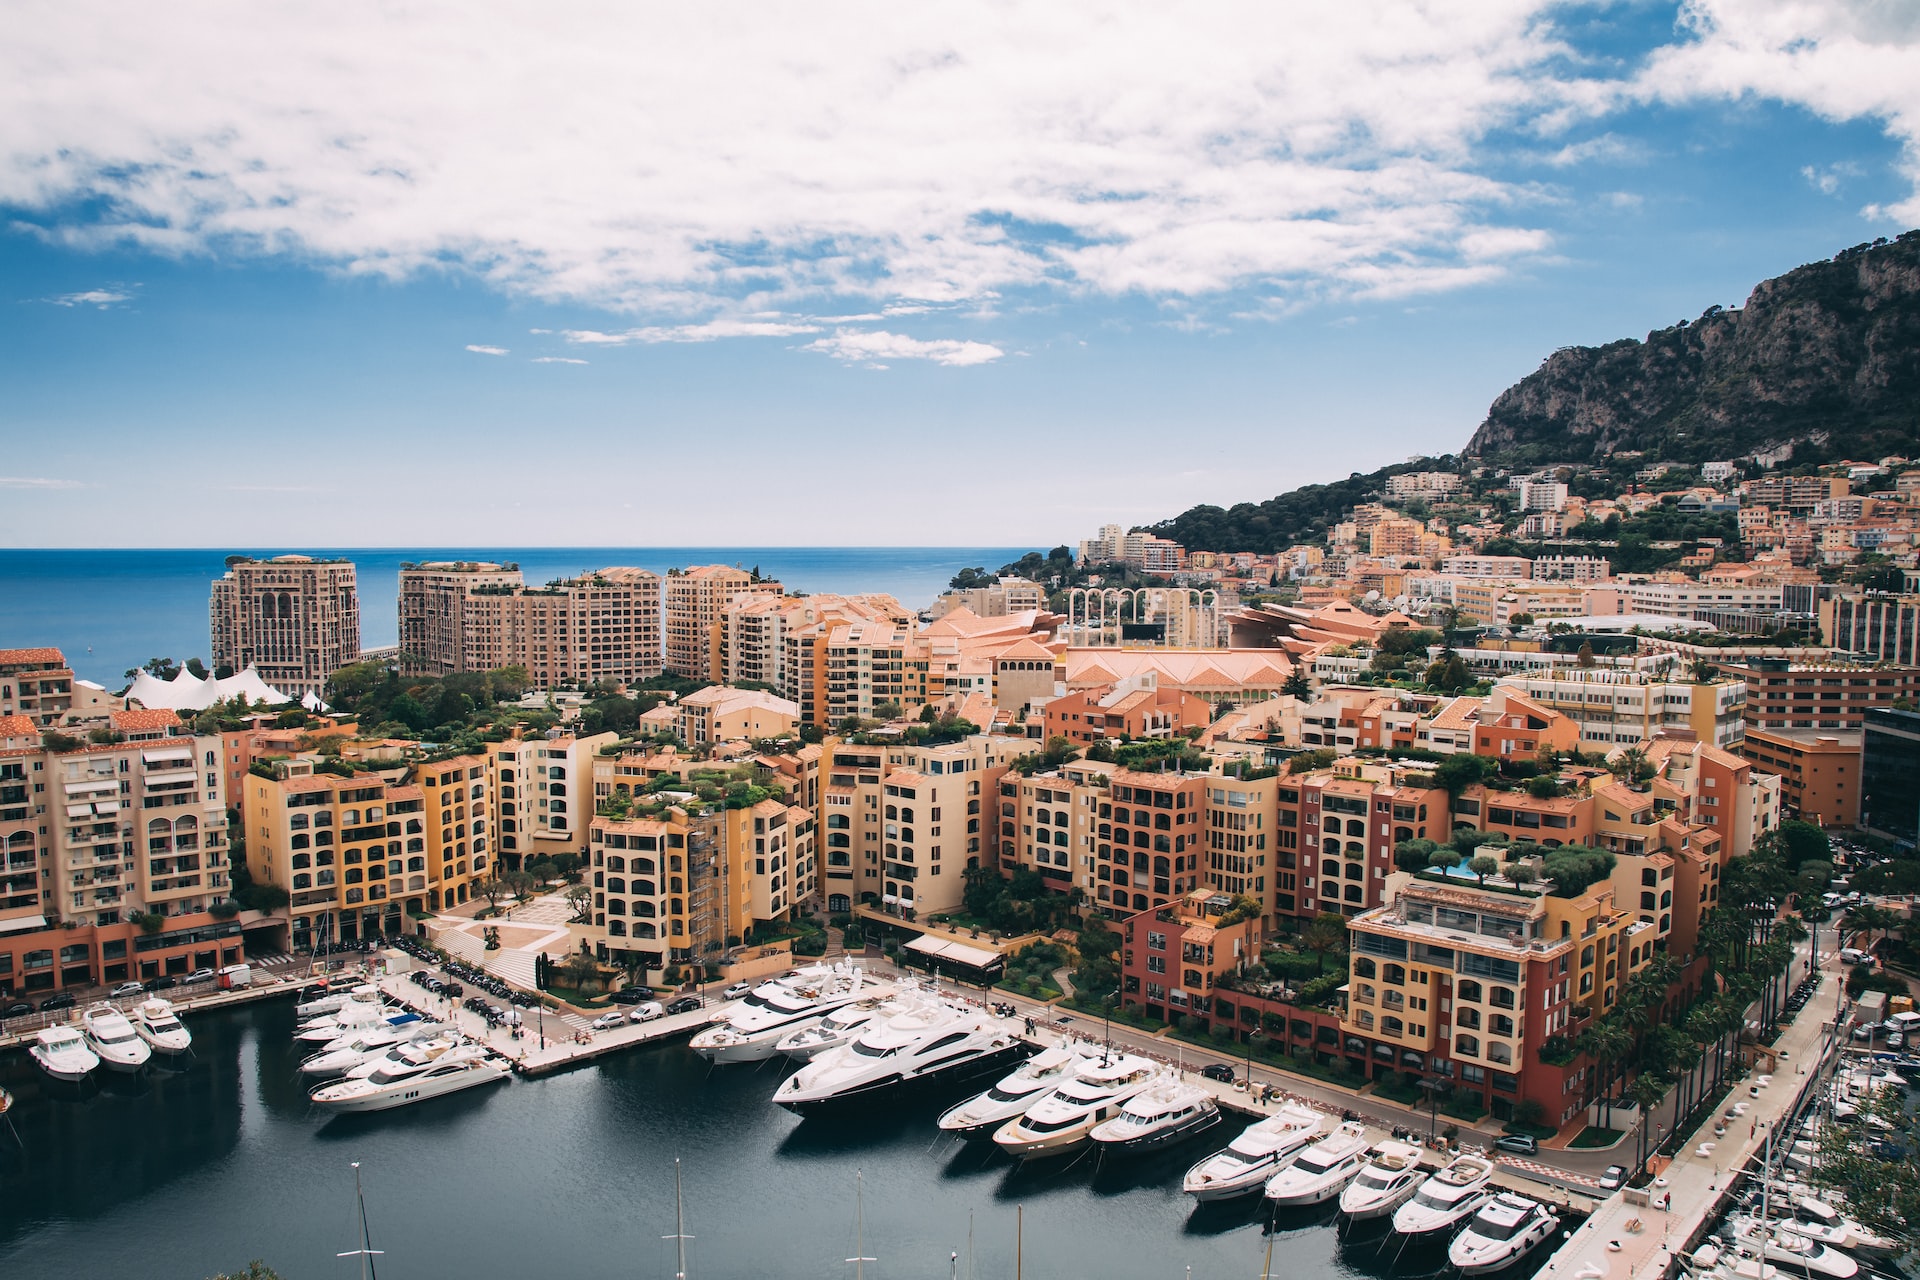 Visit Monaco South of France - A Travel Guide
